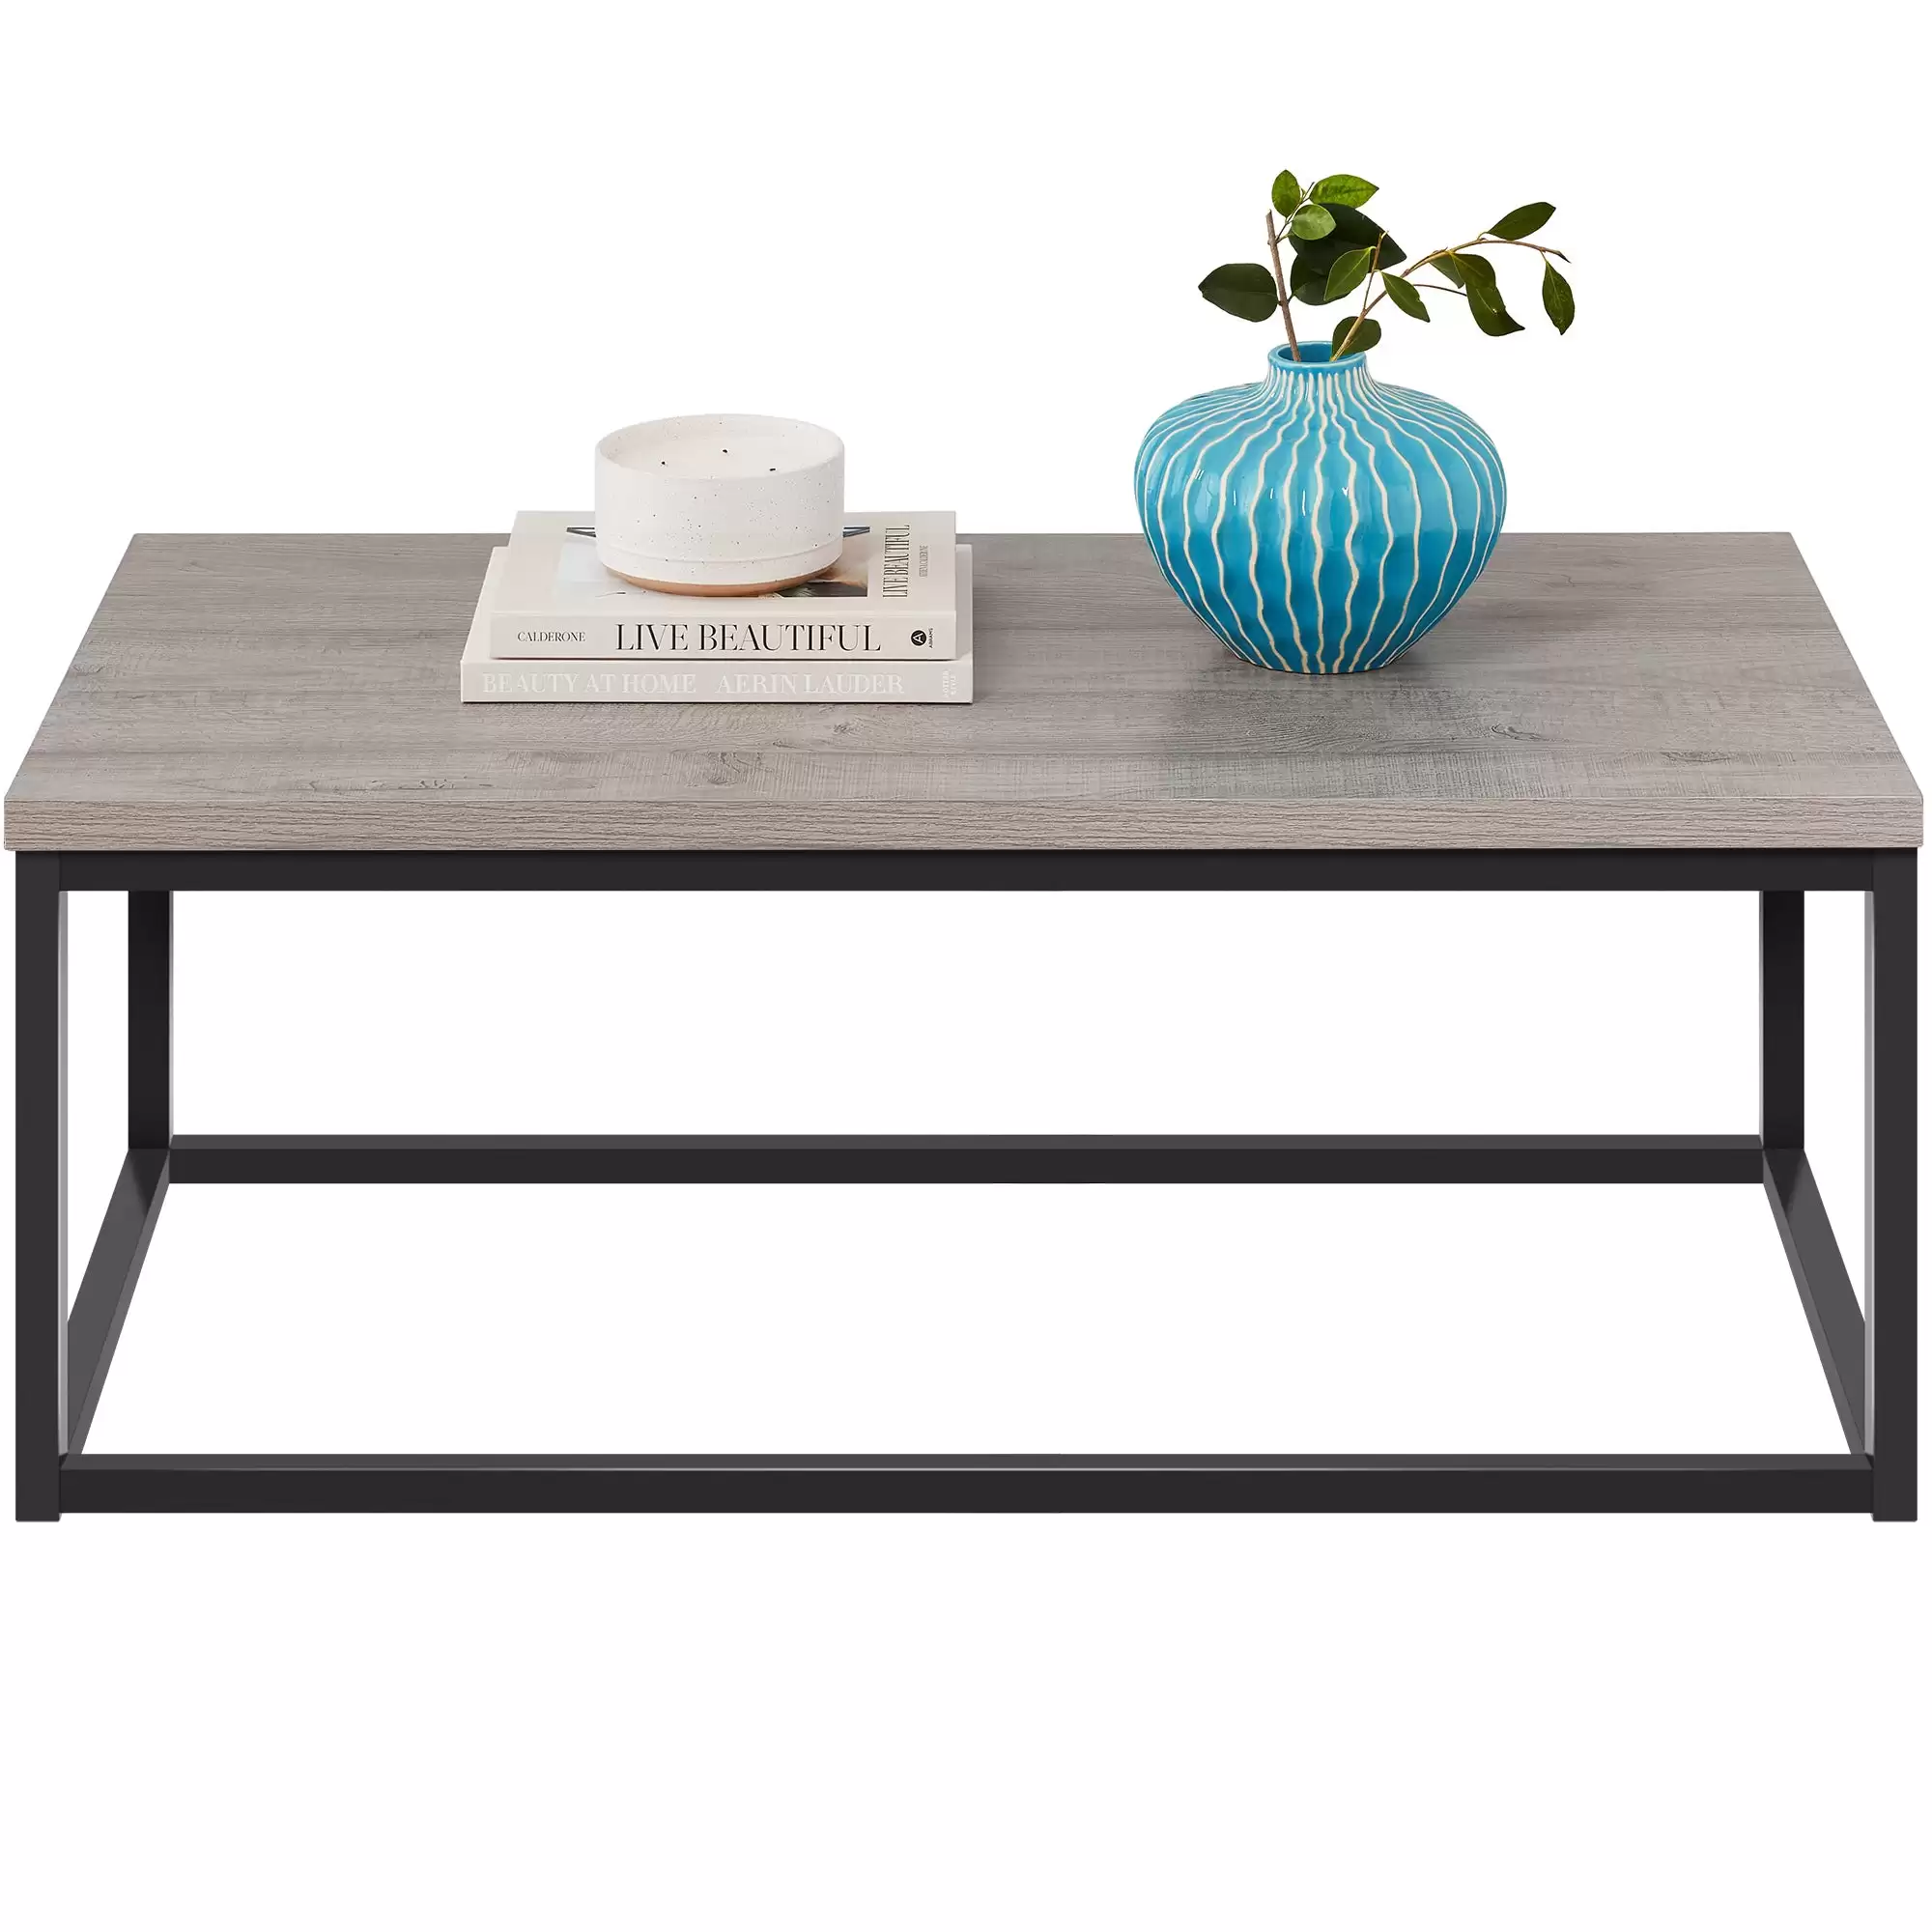 Buy $59.99 44in Modern Industrial Rectangular Wood Grain Coffee Table W/ Metal Frame With This Bestchoiceproducts Discount Voucher